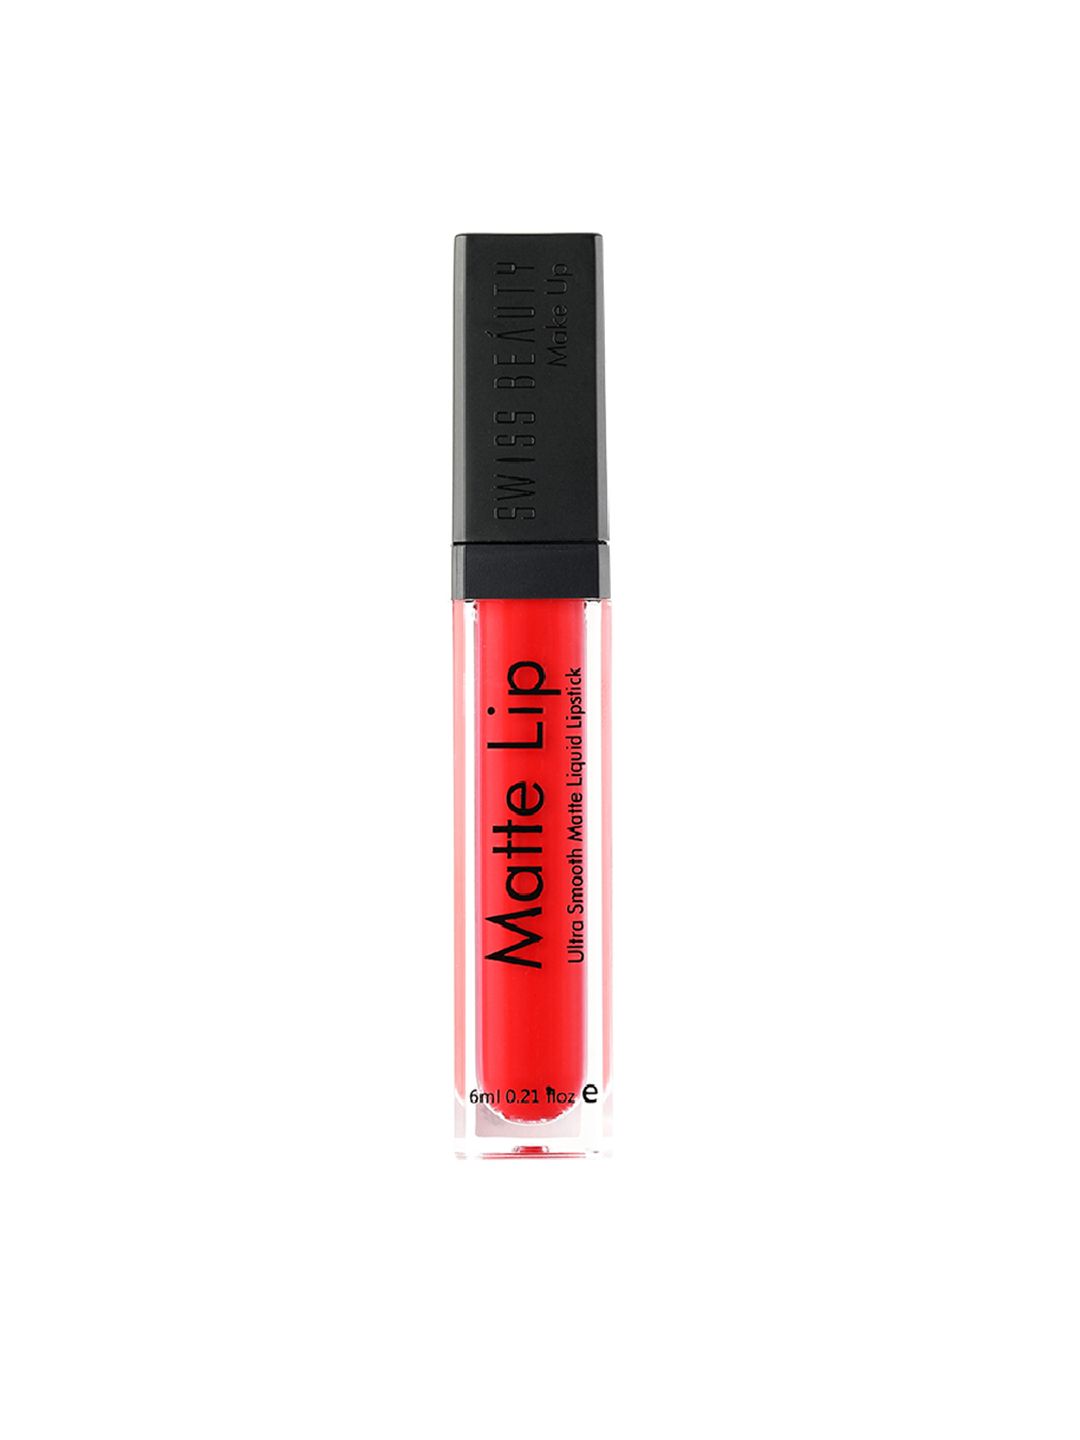 SWISS BEAUTY Ultra Smooth Matte Liquid Lipstick - 01 Hot Red Price in India